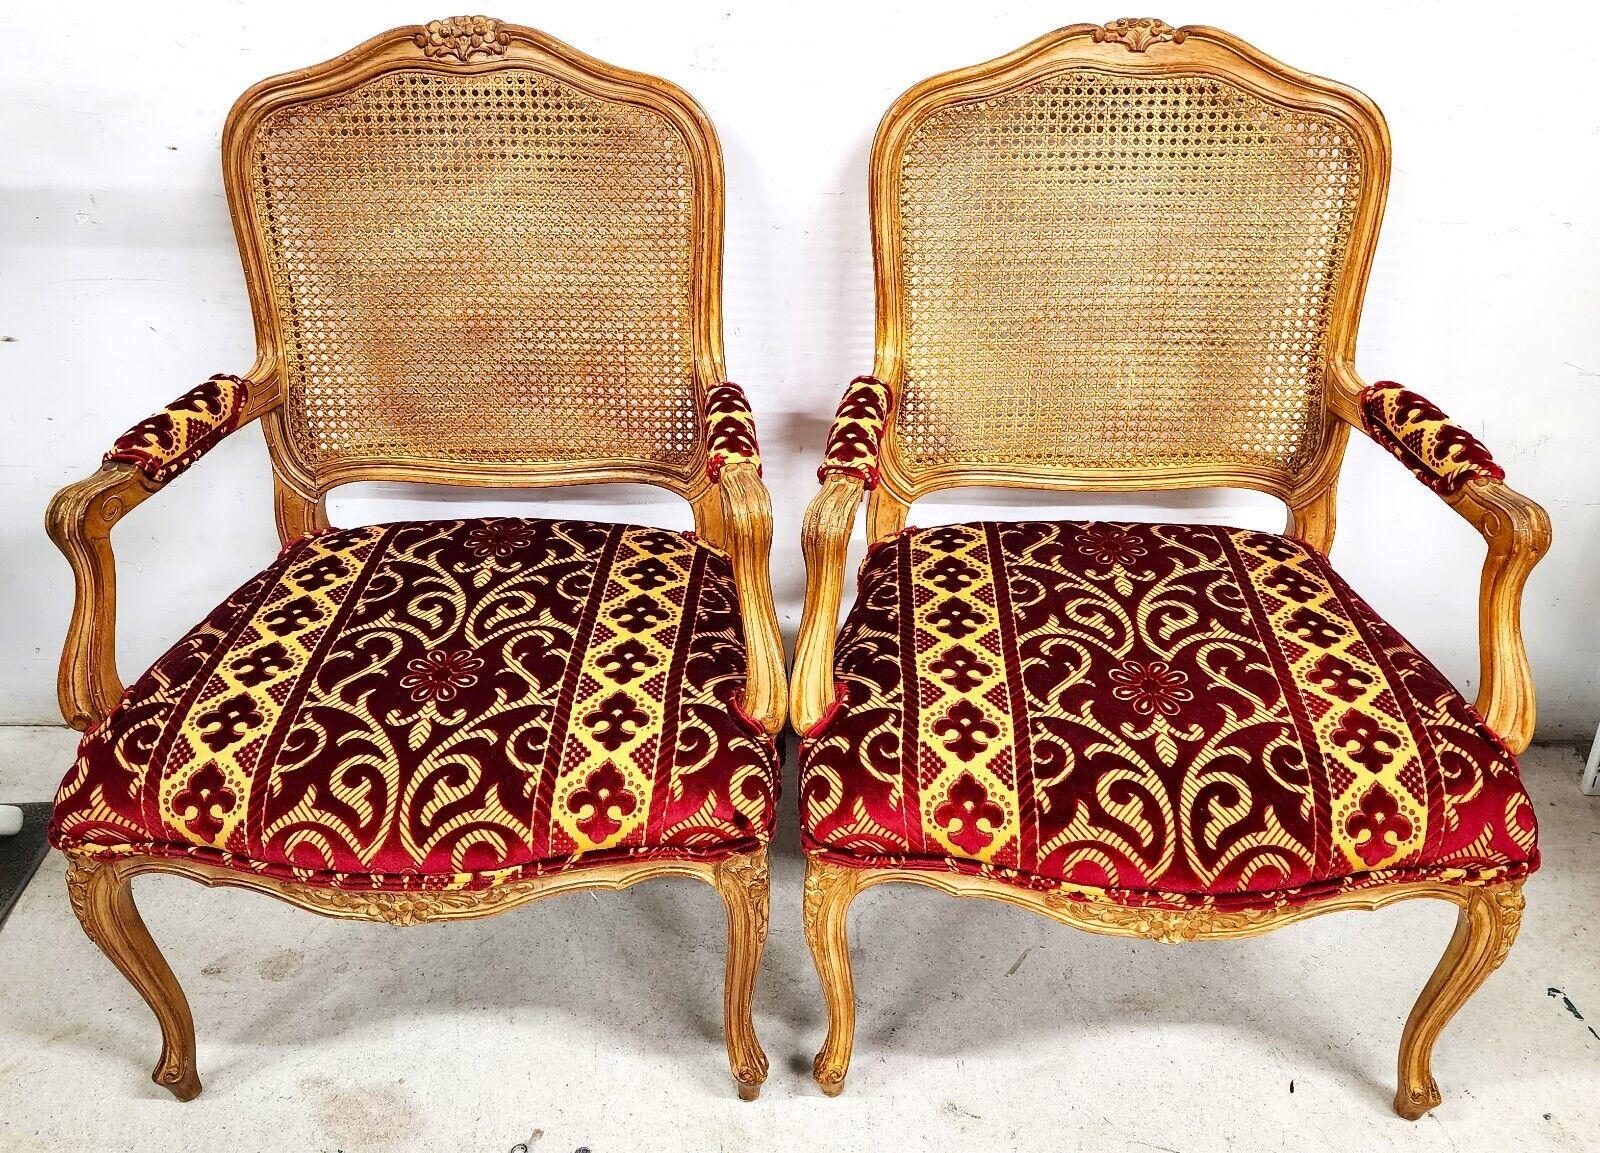 For FULL item description click on CONTINUE READING at the bottom of this page.

Offering One Of Our Recent Palm Beach Estate Fine Furniture Acquisitions Of A
Pair of French Louis XV Style Mid Century Fauteuil Armchairs 

Approximate Measurements in